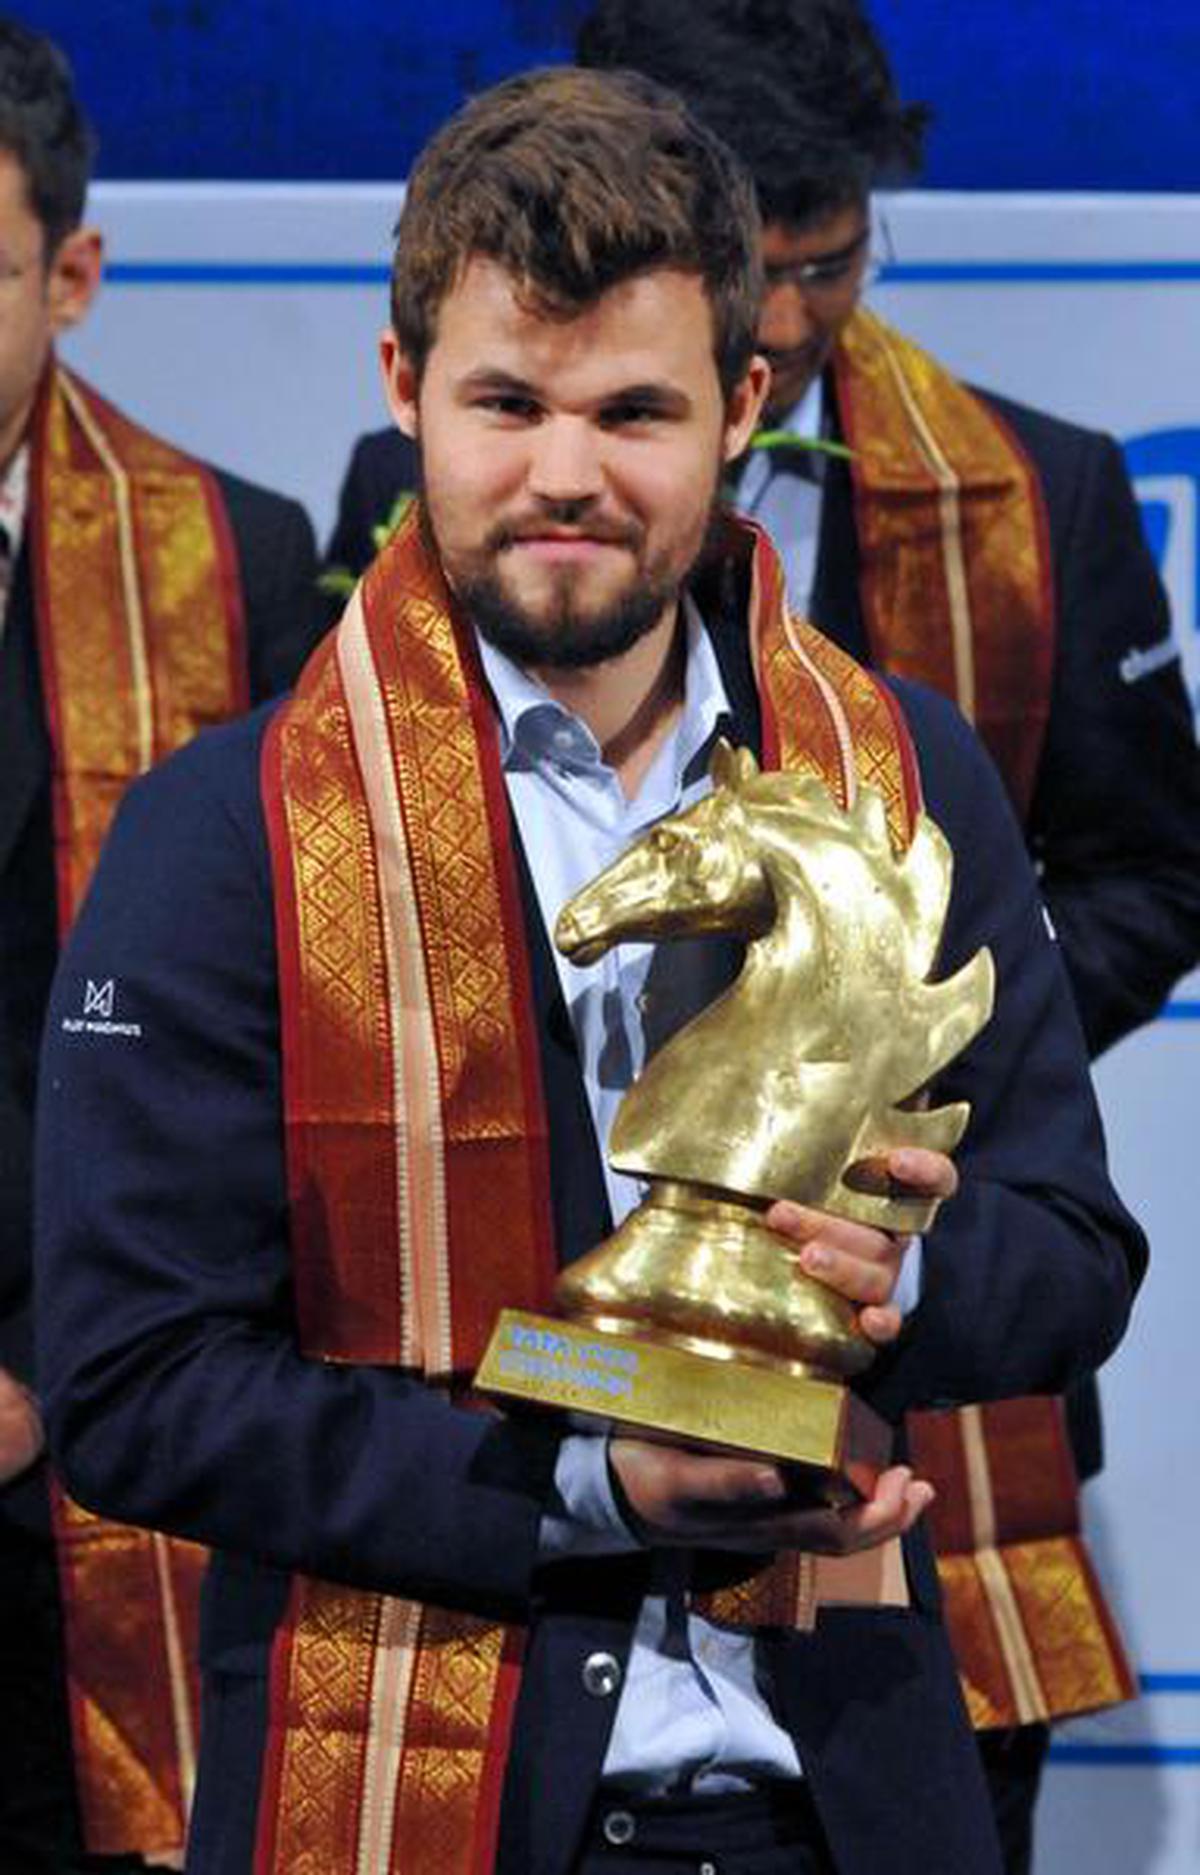 Magnus Carlsen targets all-time rating record of 2900 at Wijk aan